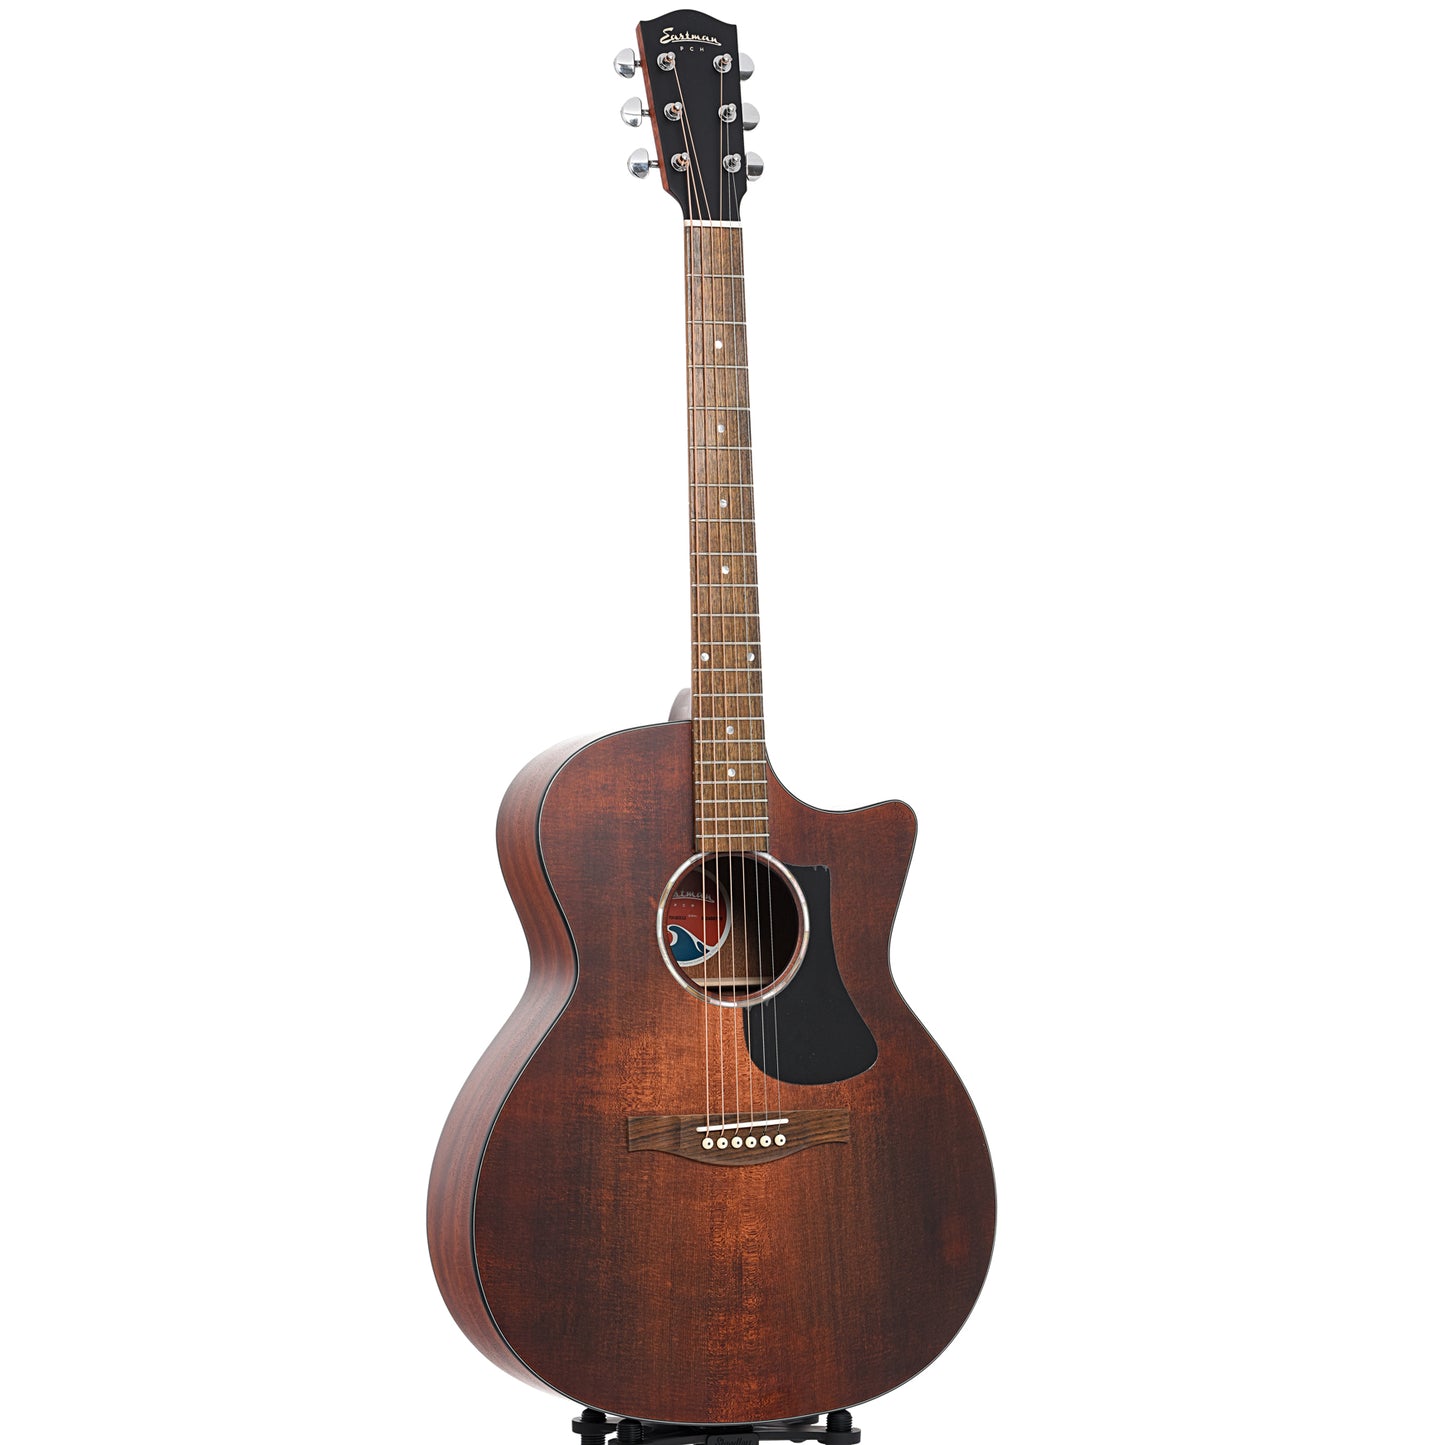 Eastman PCH1-Gace "Pacific Coast Highway" Acoustic Guitar & Gigbag, Classic Stained Finish